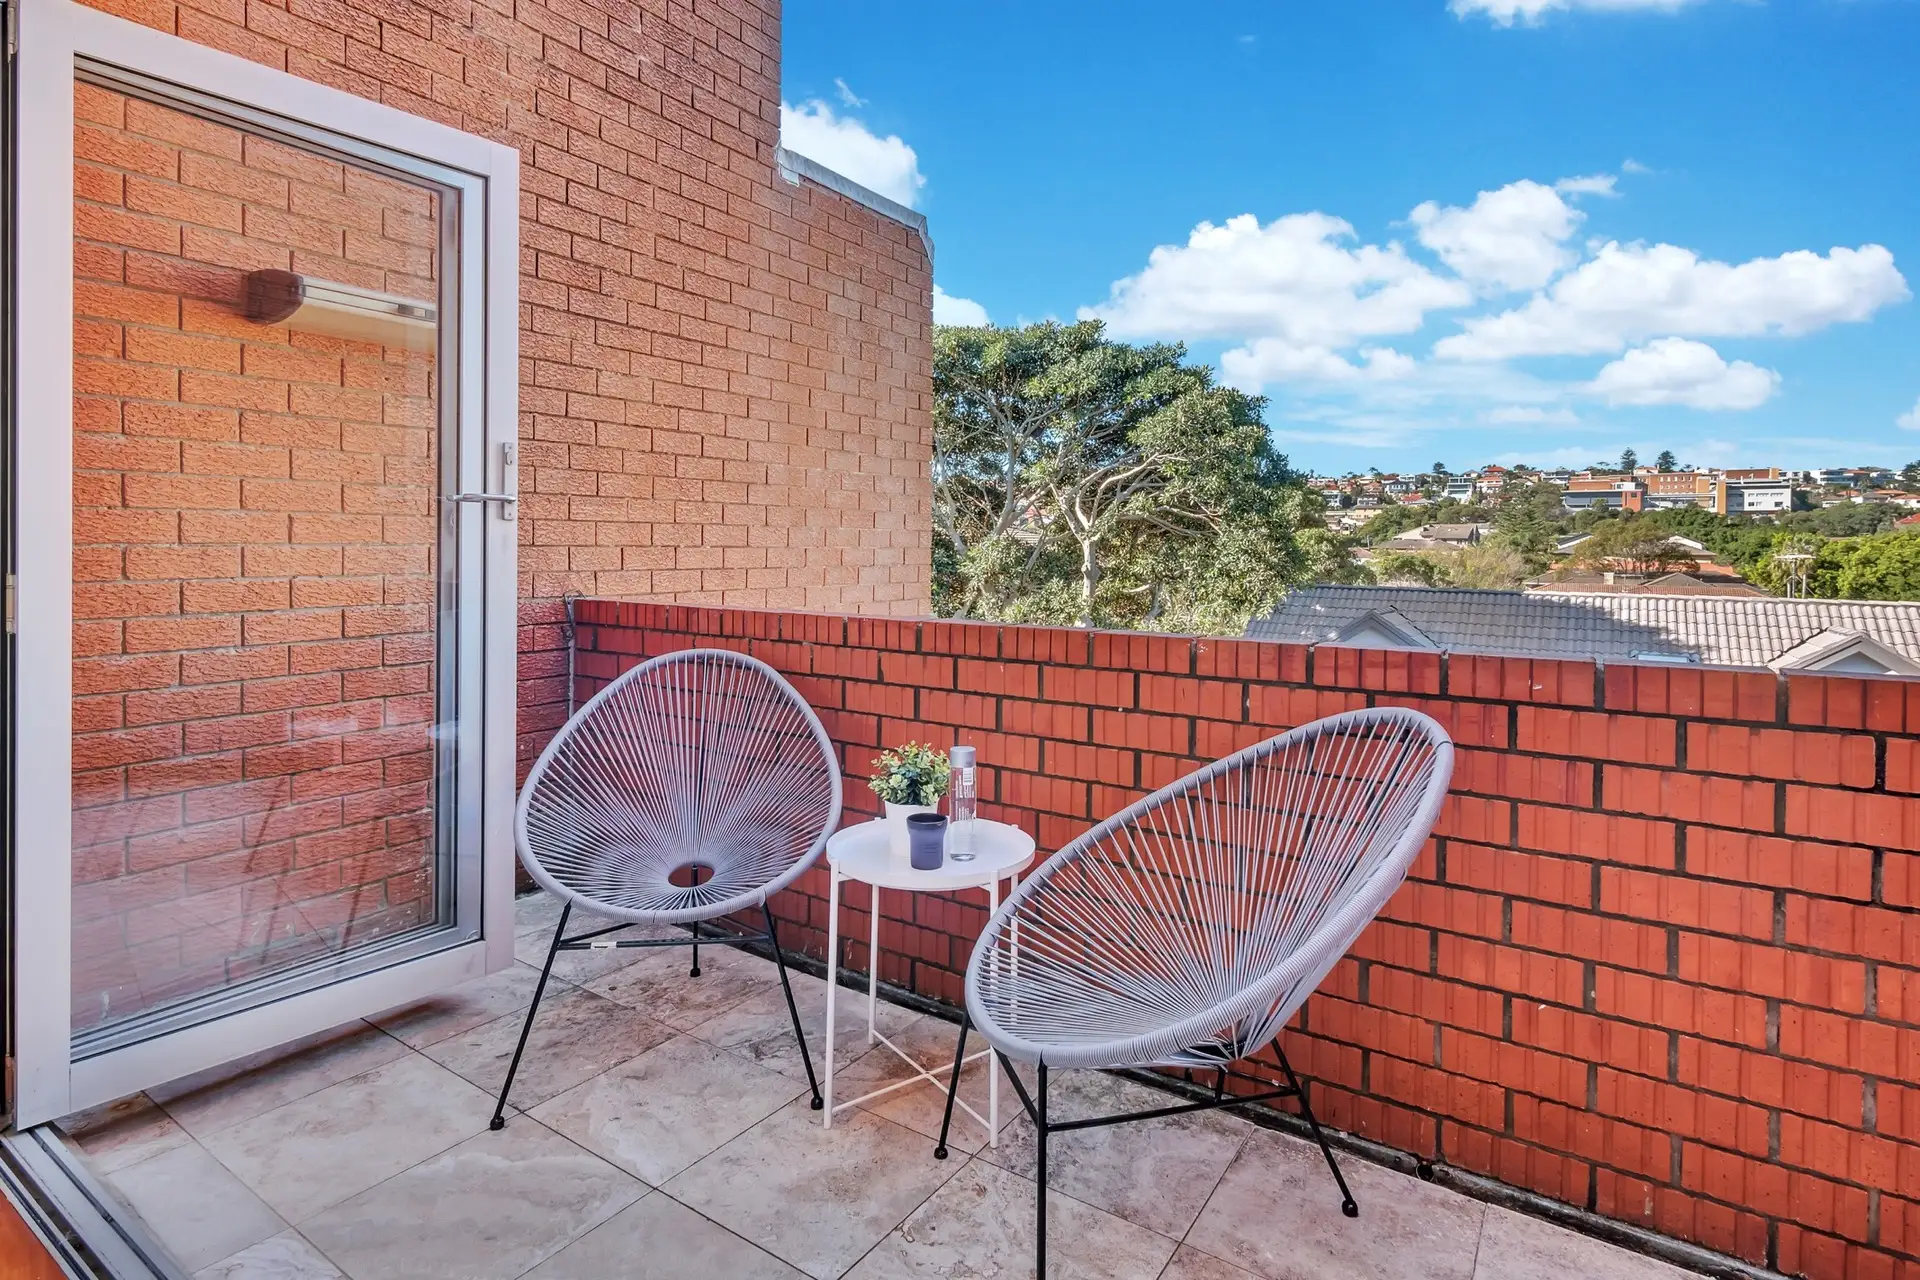 9/449 Old South Head Road, Rose Bay Sold by Bradfield Badgerfox - image 1